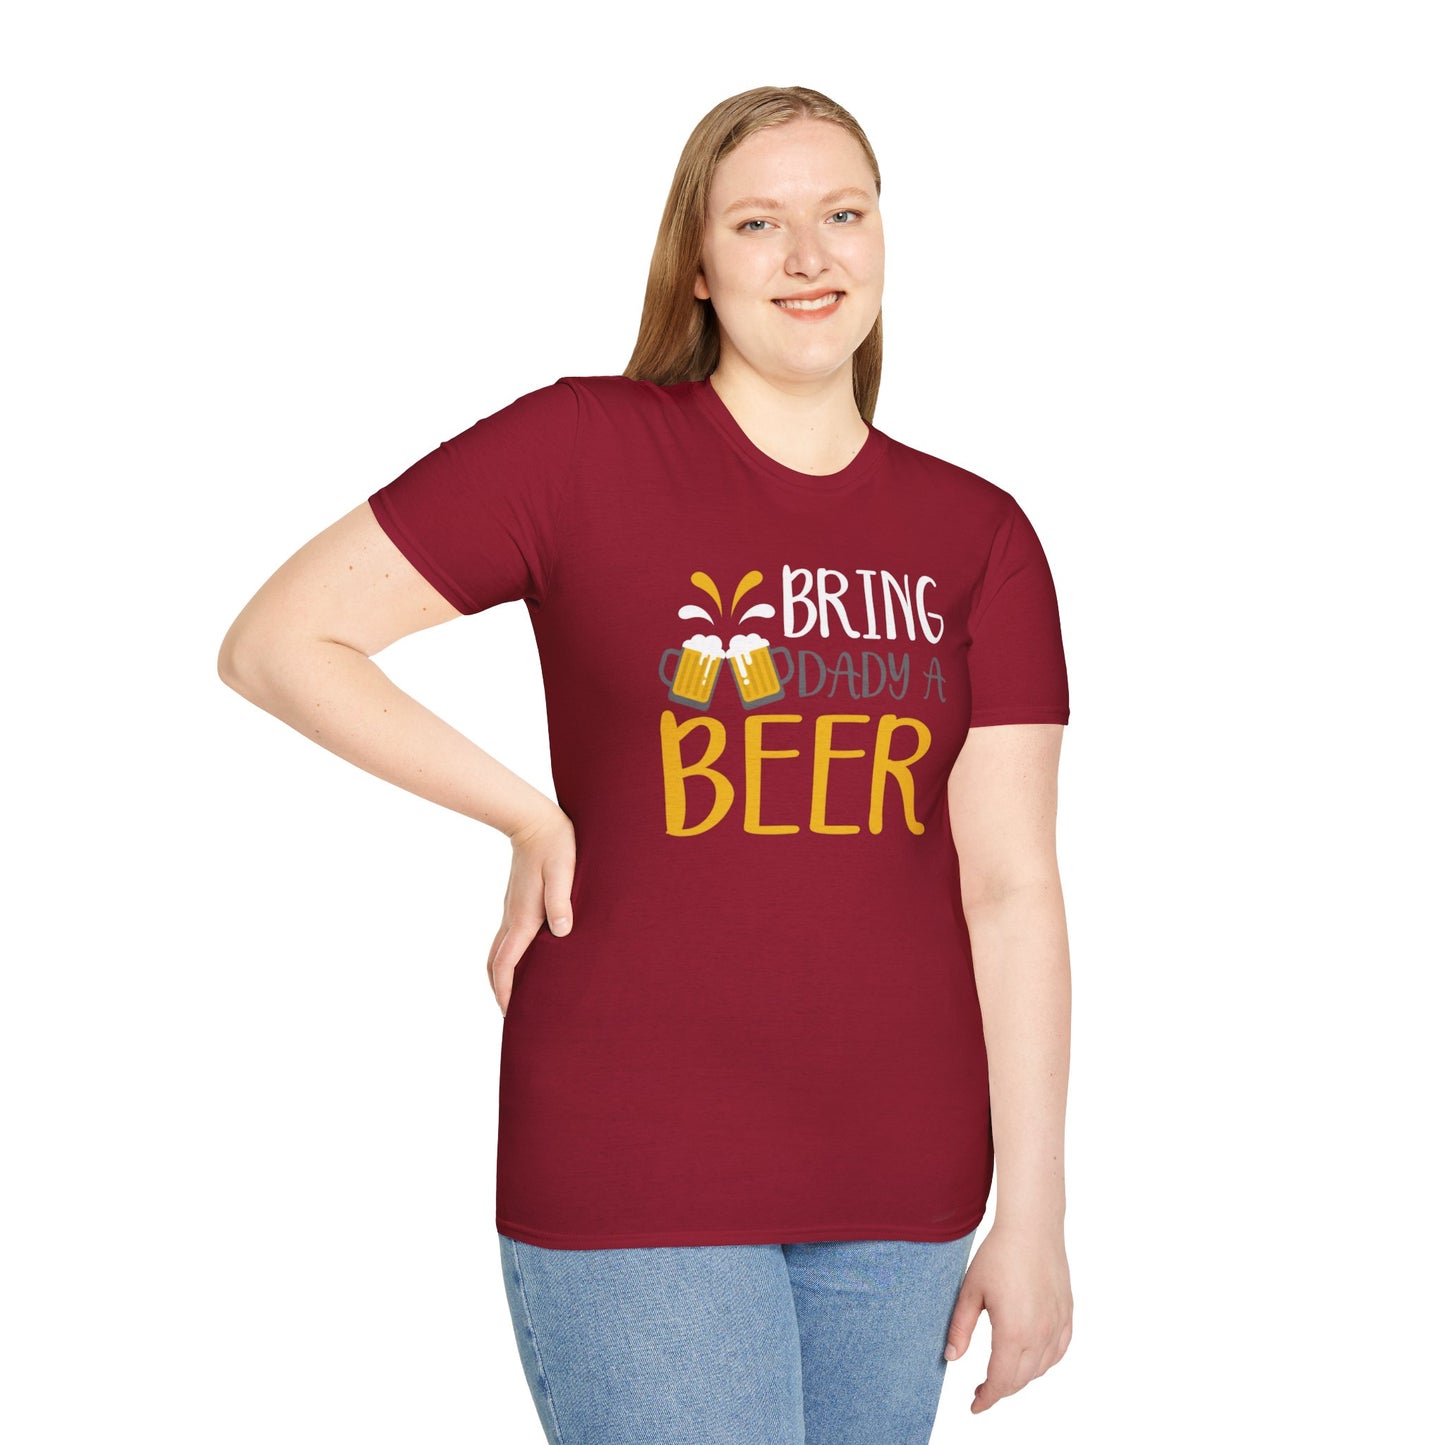 Dad's Favorite Brews: 'Bring Dad a BEER' T-Shirt for the Ultimate Father's Day Gift